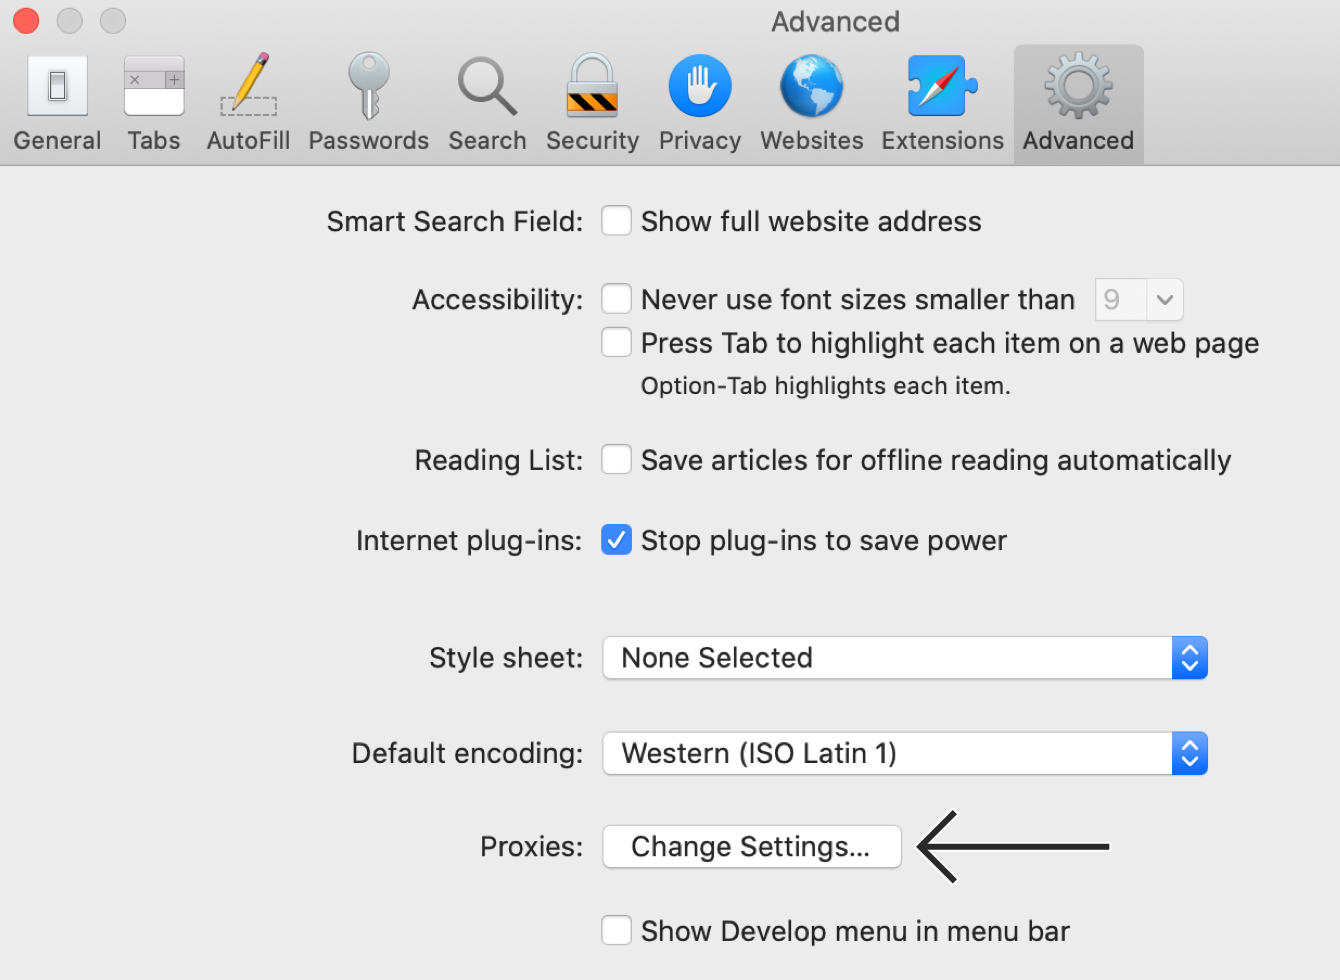 In the “Advanced” tab, click “Change Settings…”